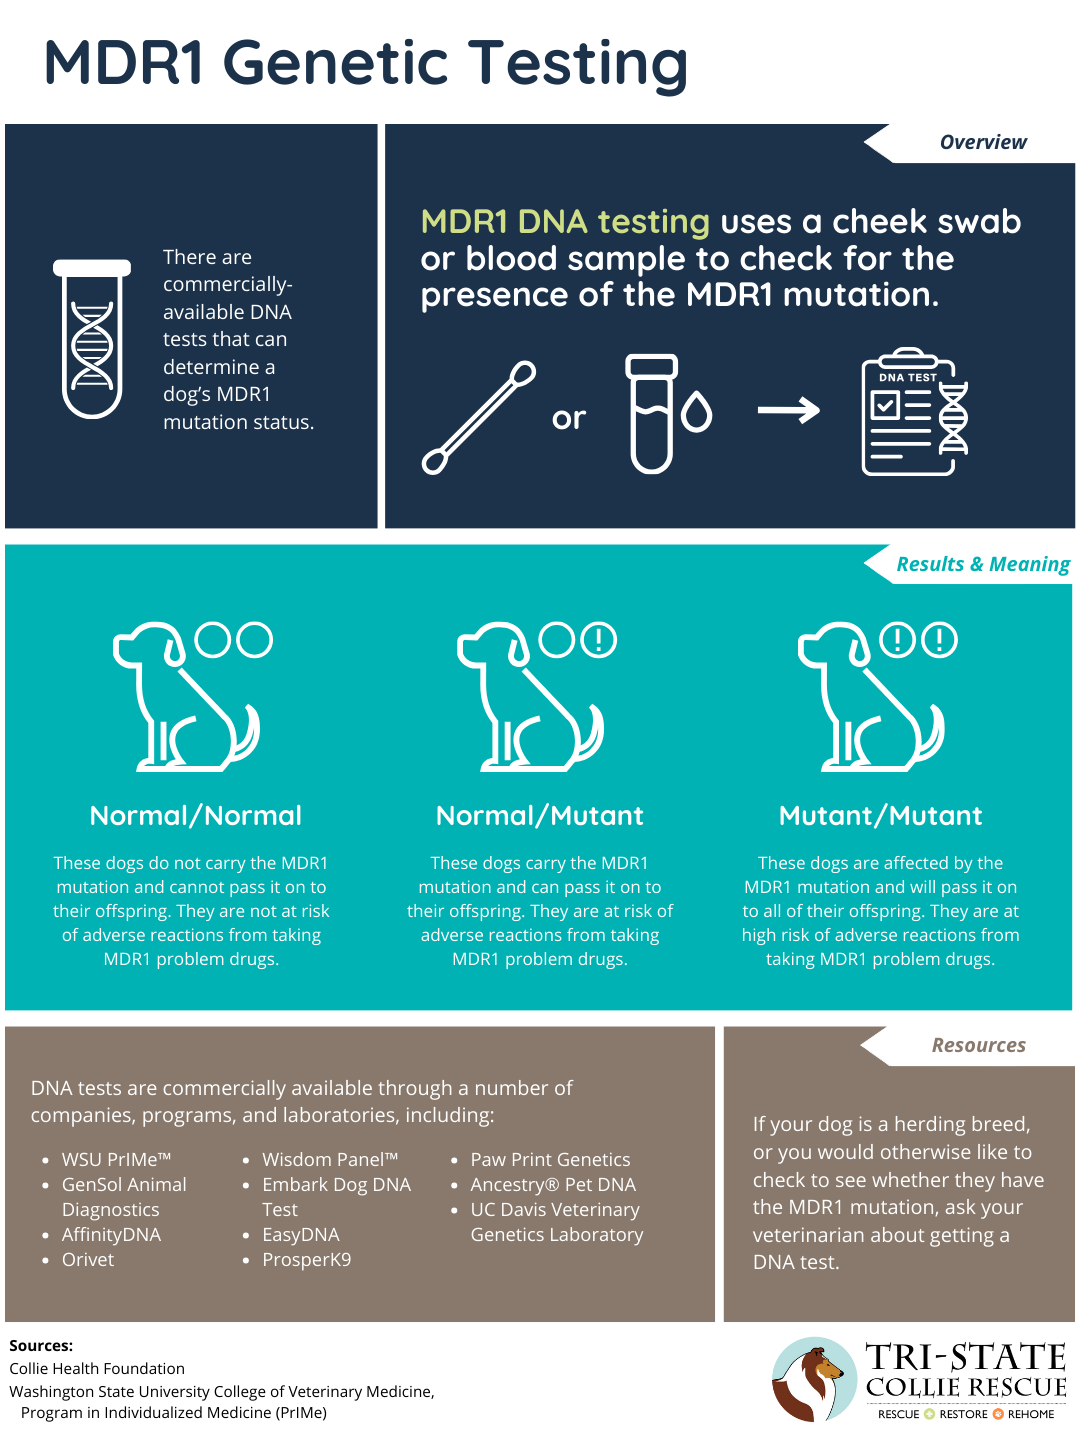 MDR1 Genetic Testing Infographic FINAL